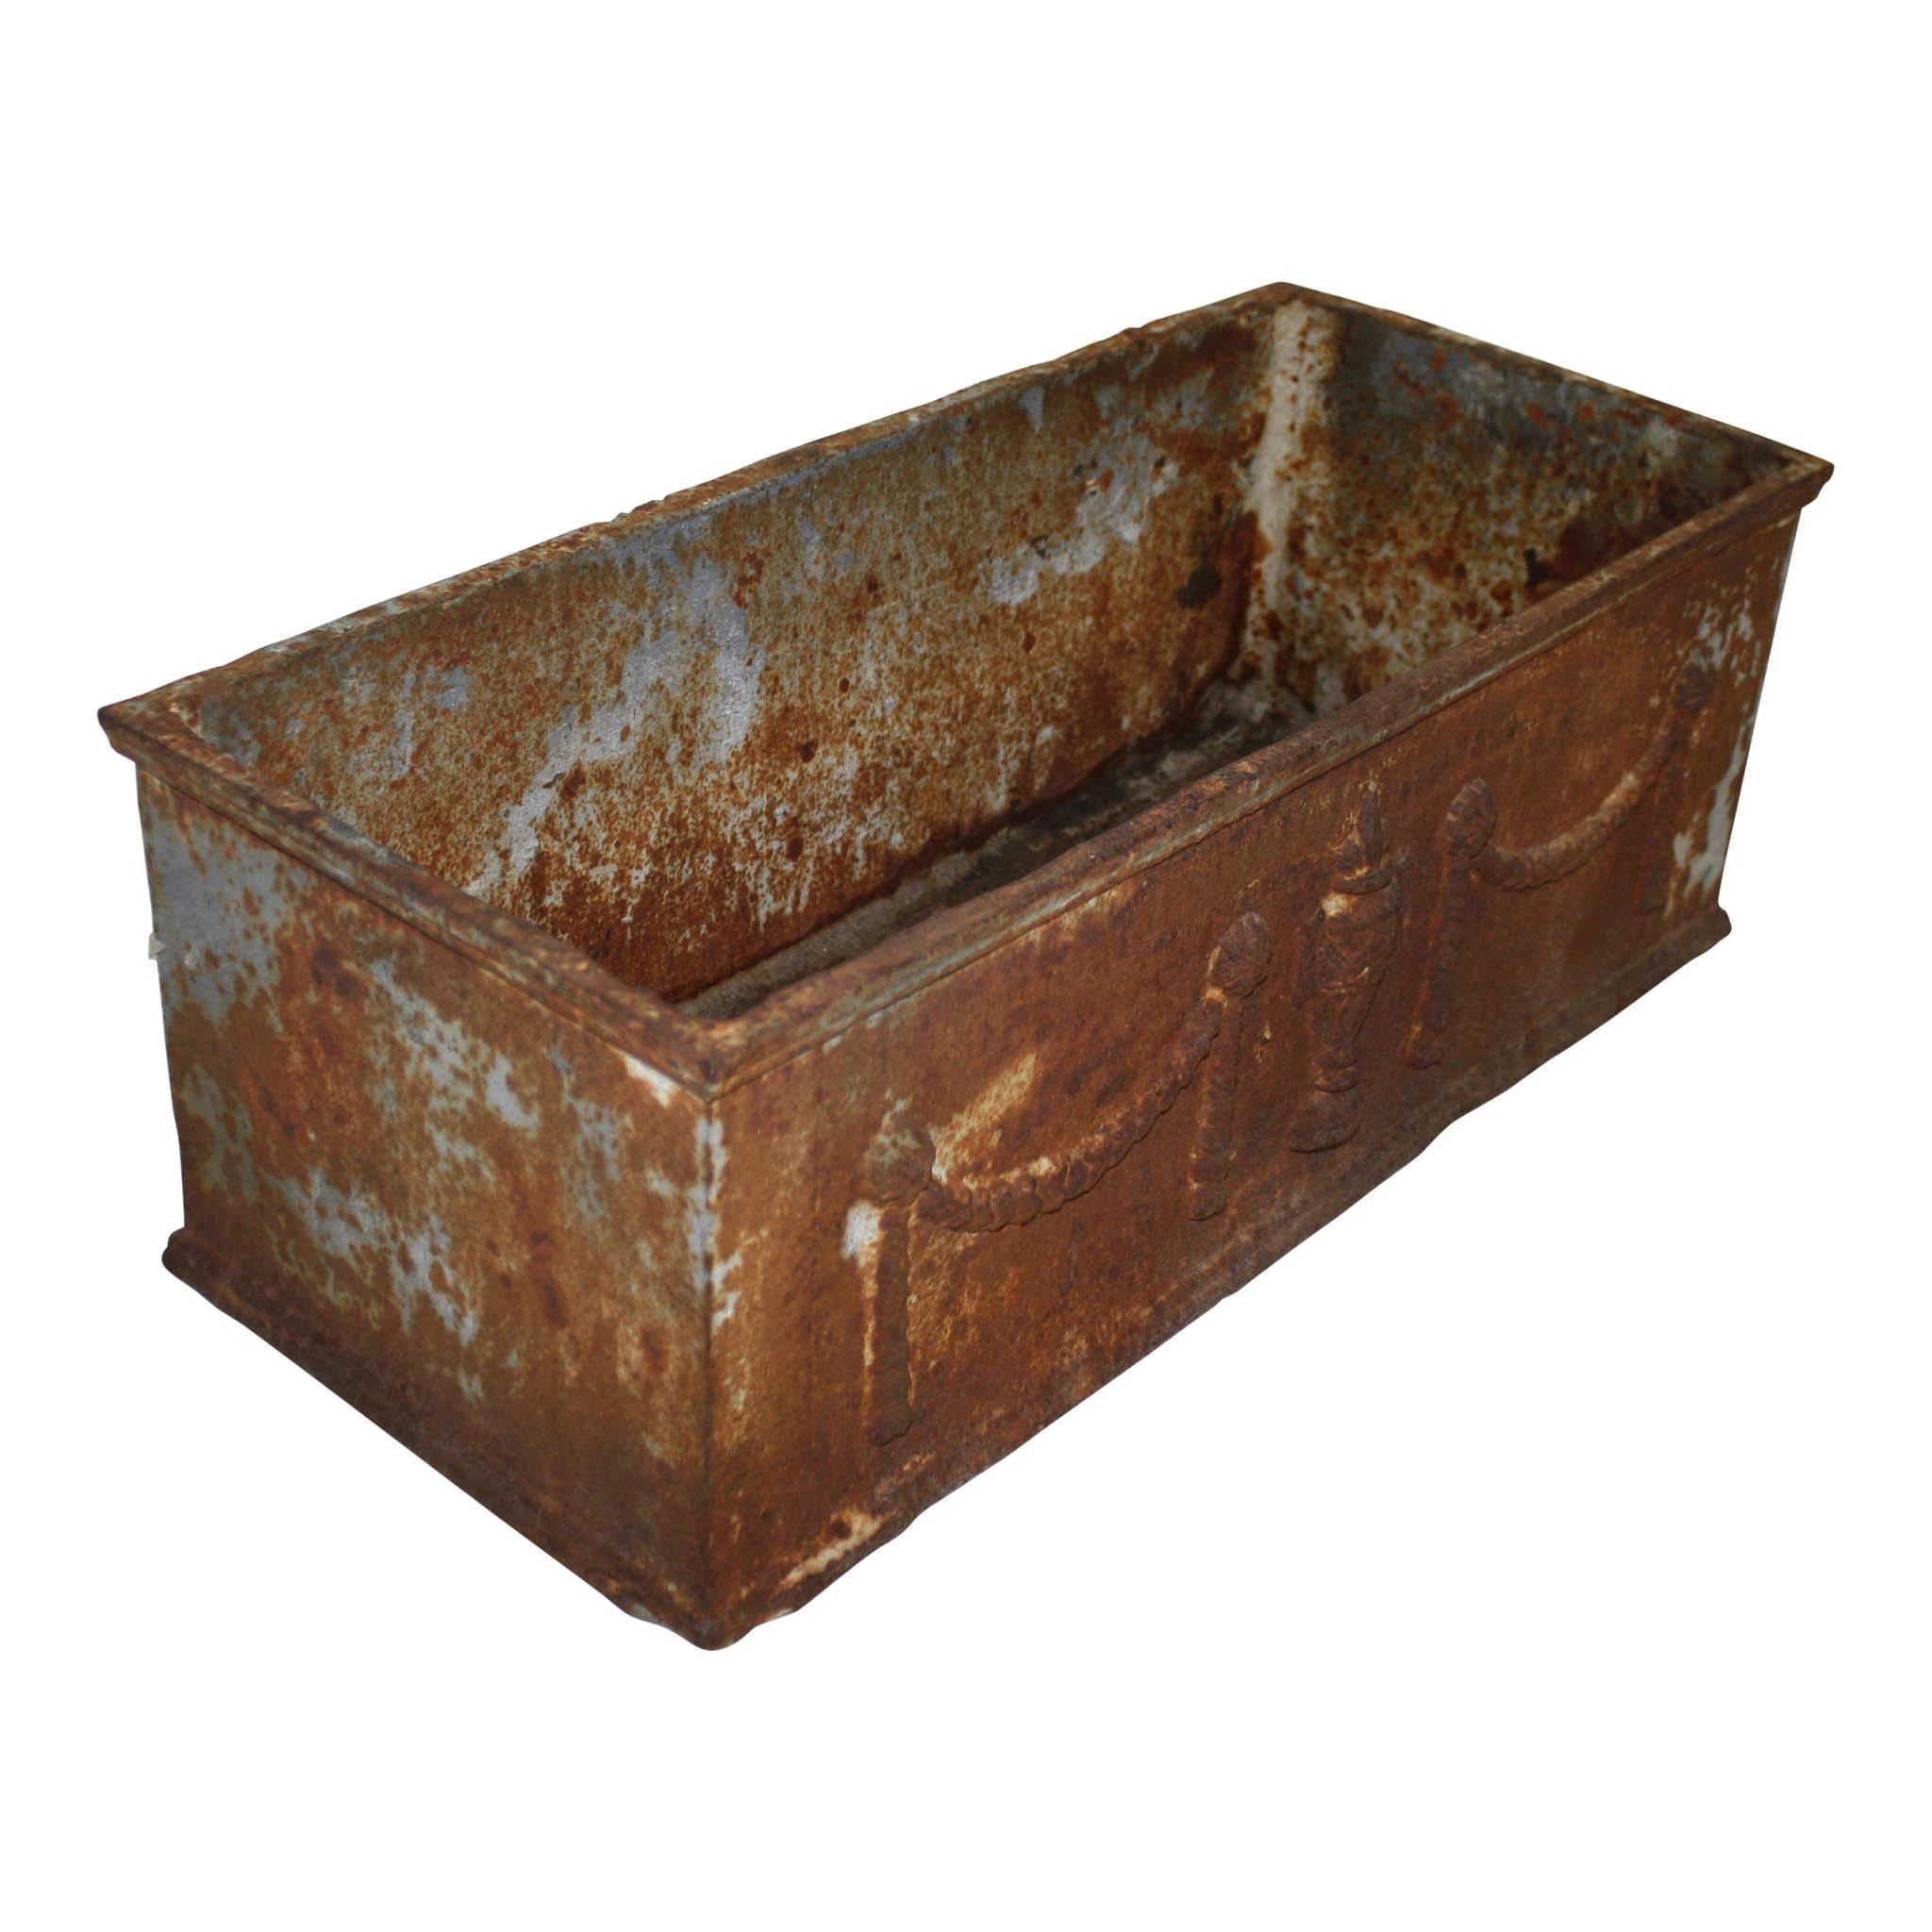 This rectangular, cast iron planter features an urn and swag motif on the front and back. Perfect for outdoor or indoor use. Two drain holes.